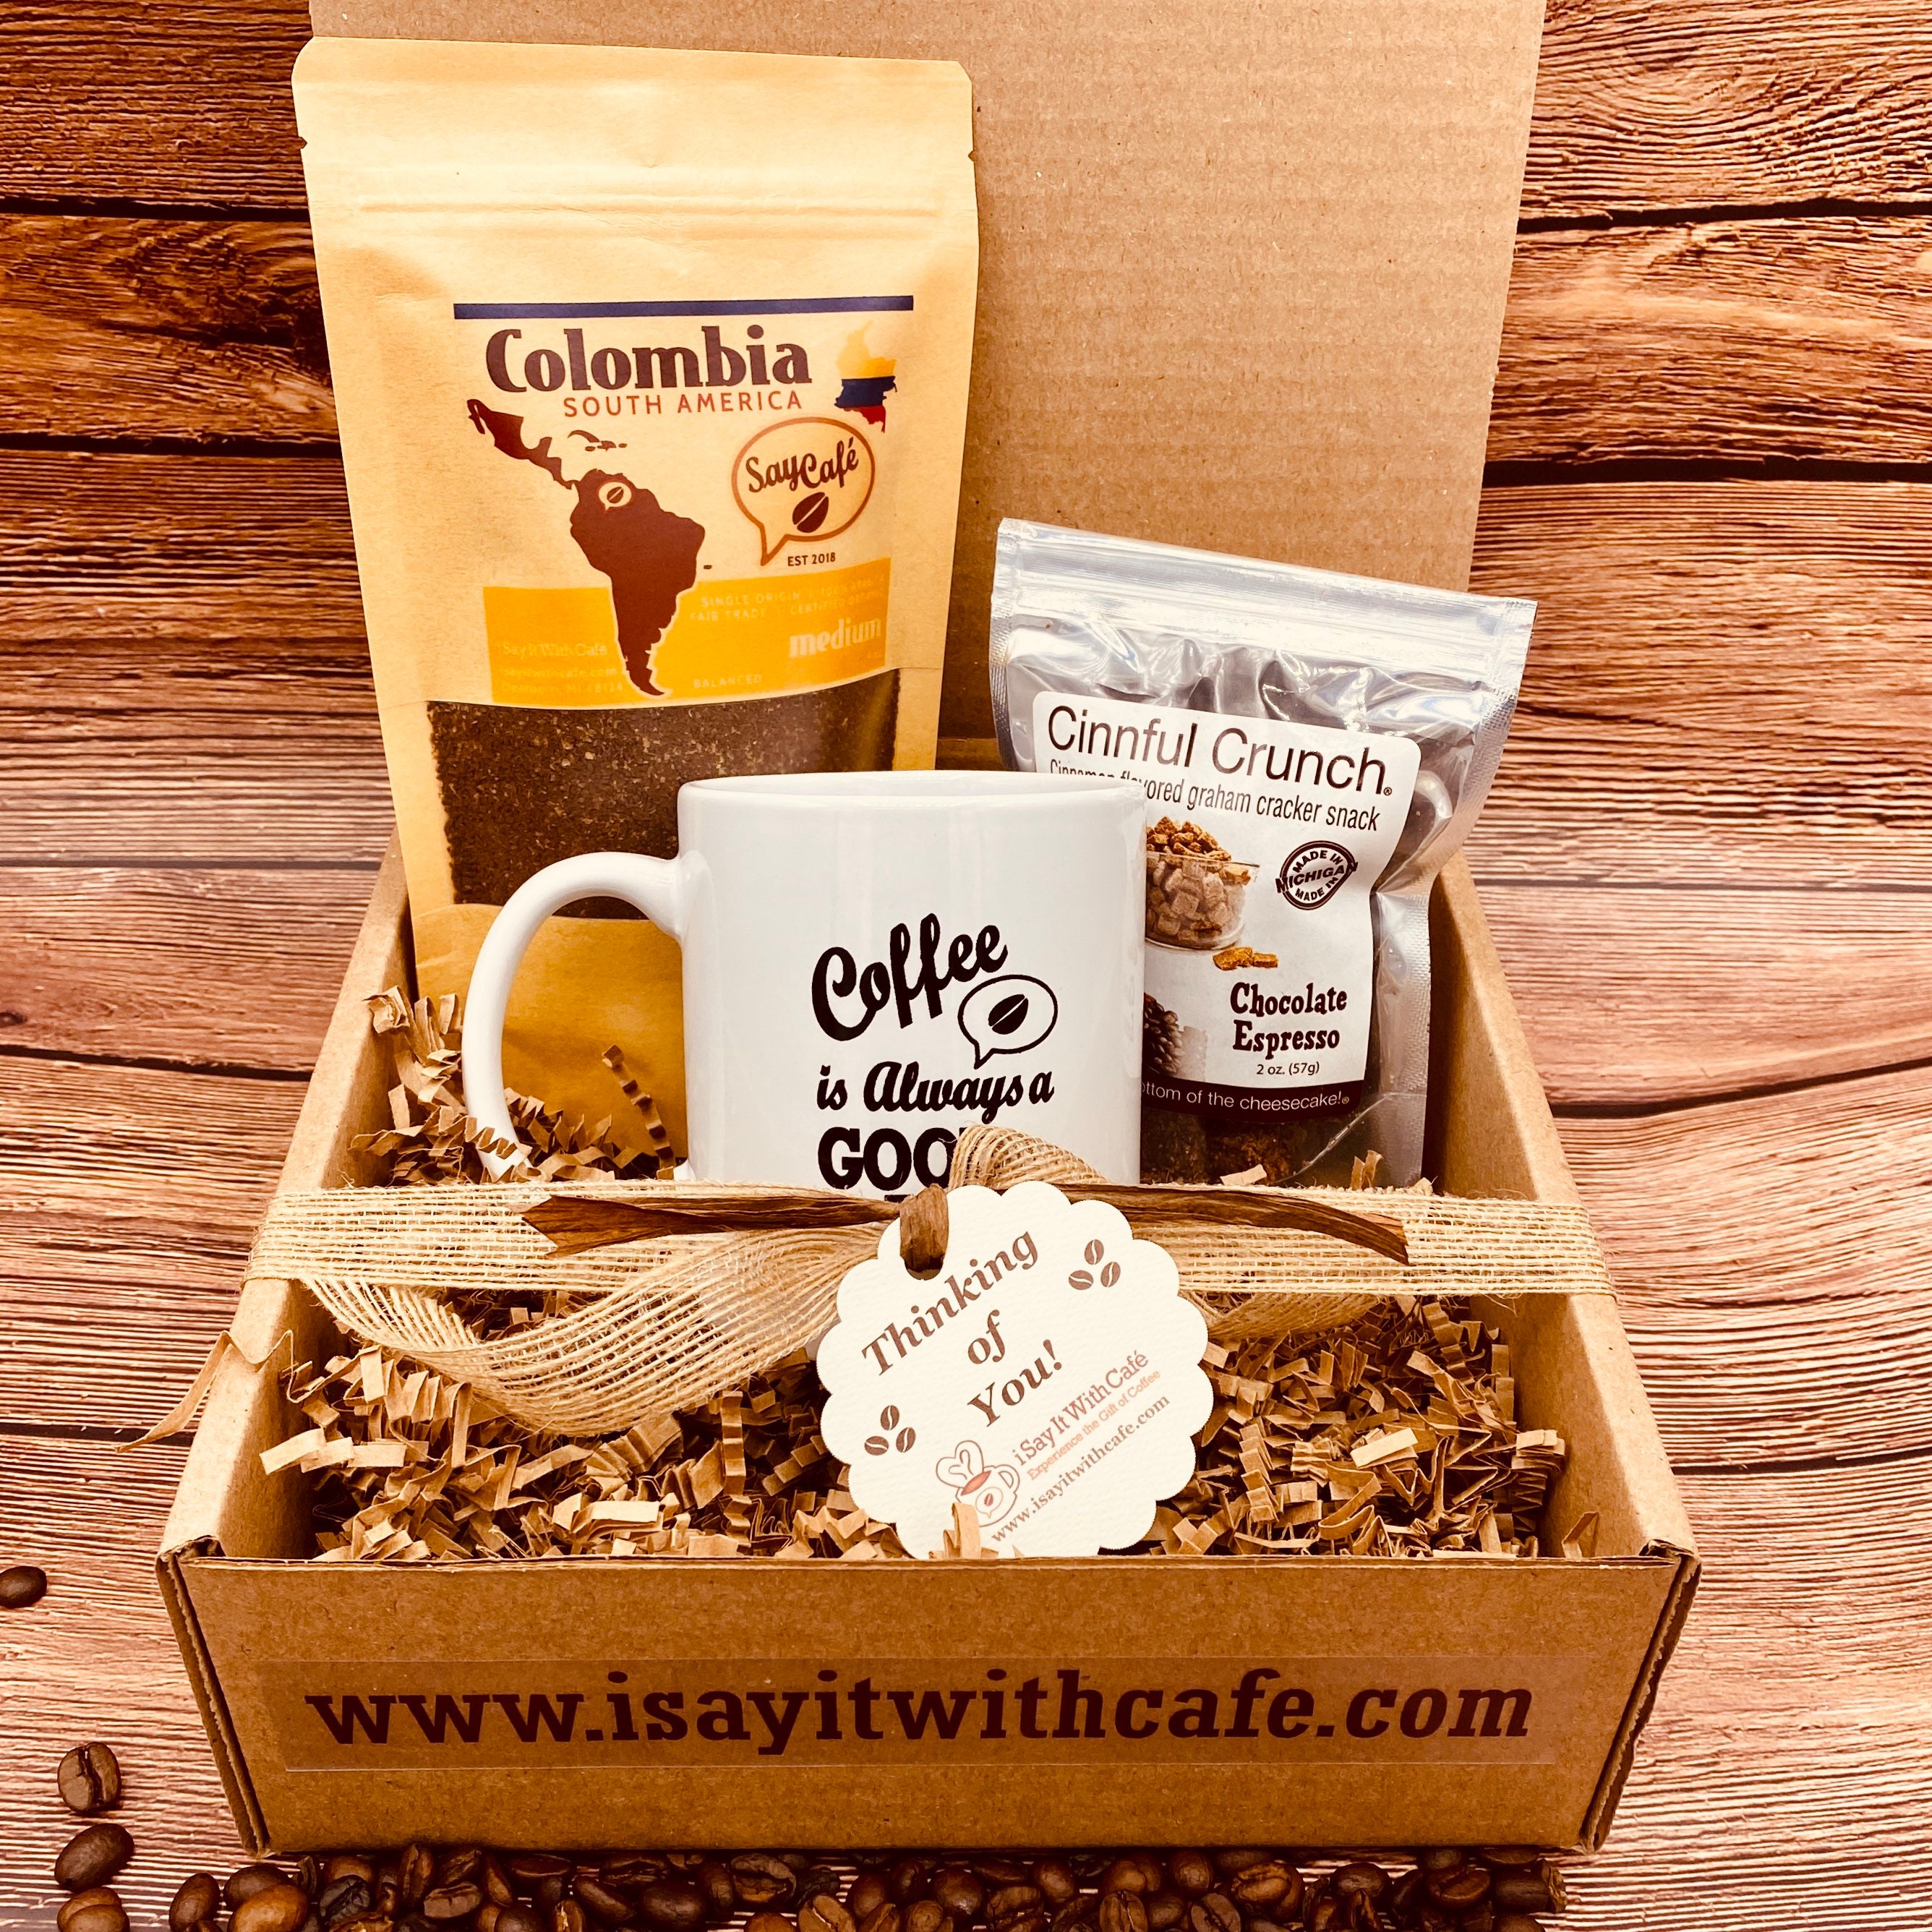 Holiday Treats! Flavored Coffee Gift Box w/Treats & Accessories - Perfect  Christmas Present for Coffee Lovers! - FREE SHIPPING!